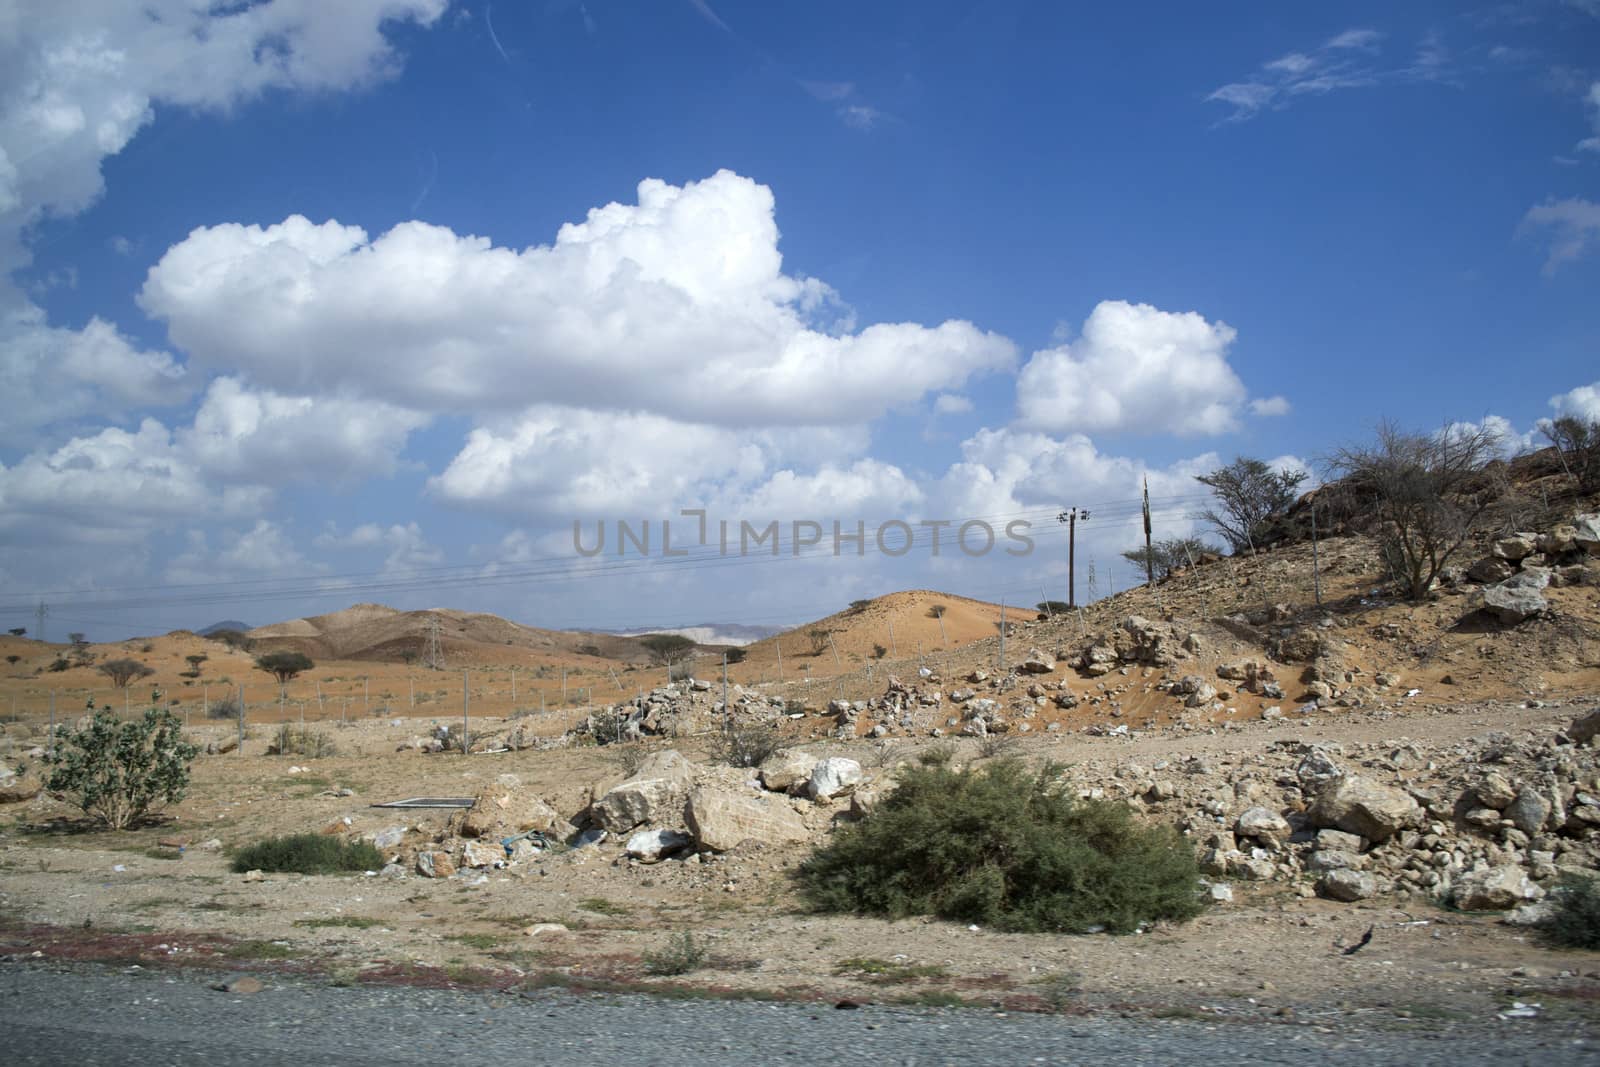 Desert landscape with blue sky, white clouds and golden sands